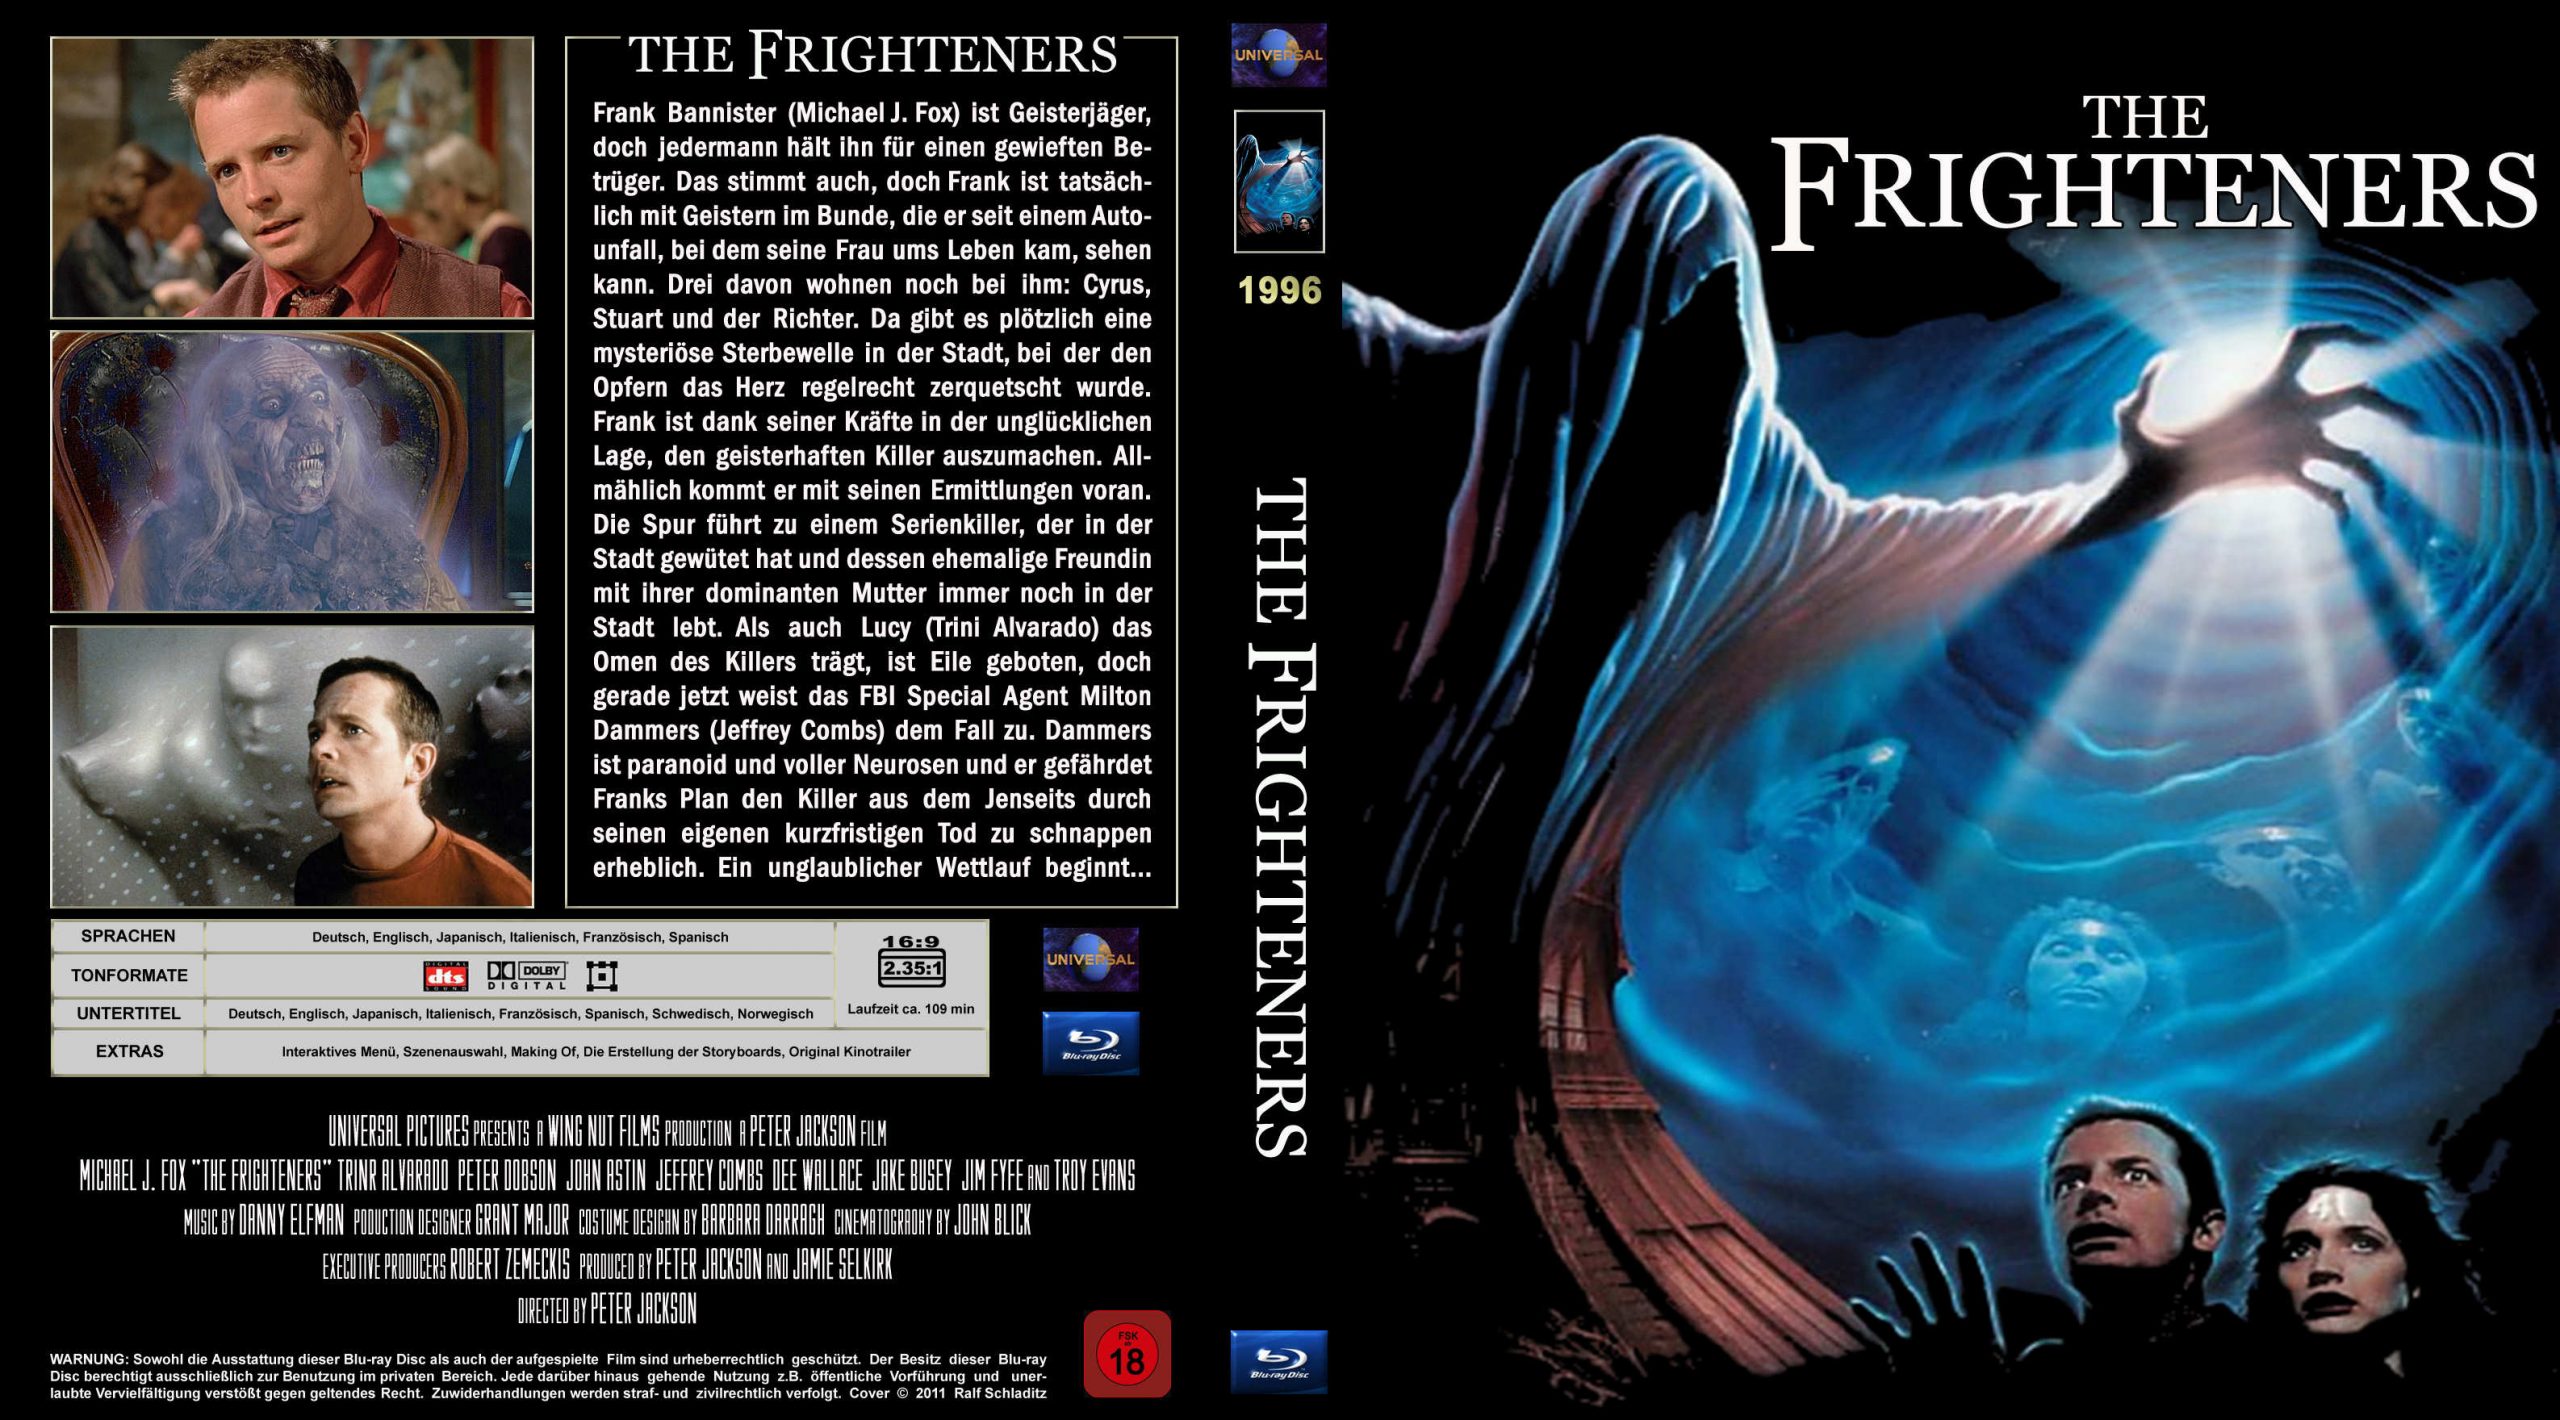 Hollywood Movie The Frighteners Plot Summary Reviews Actors Quotes 1996